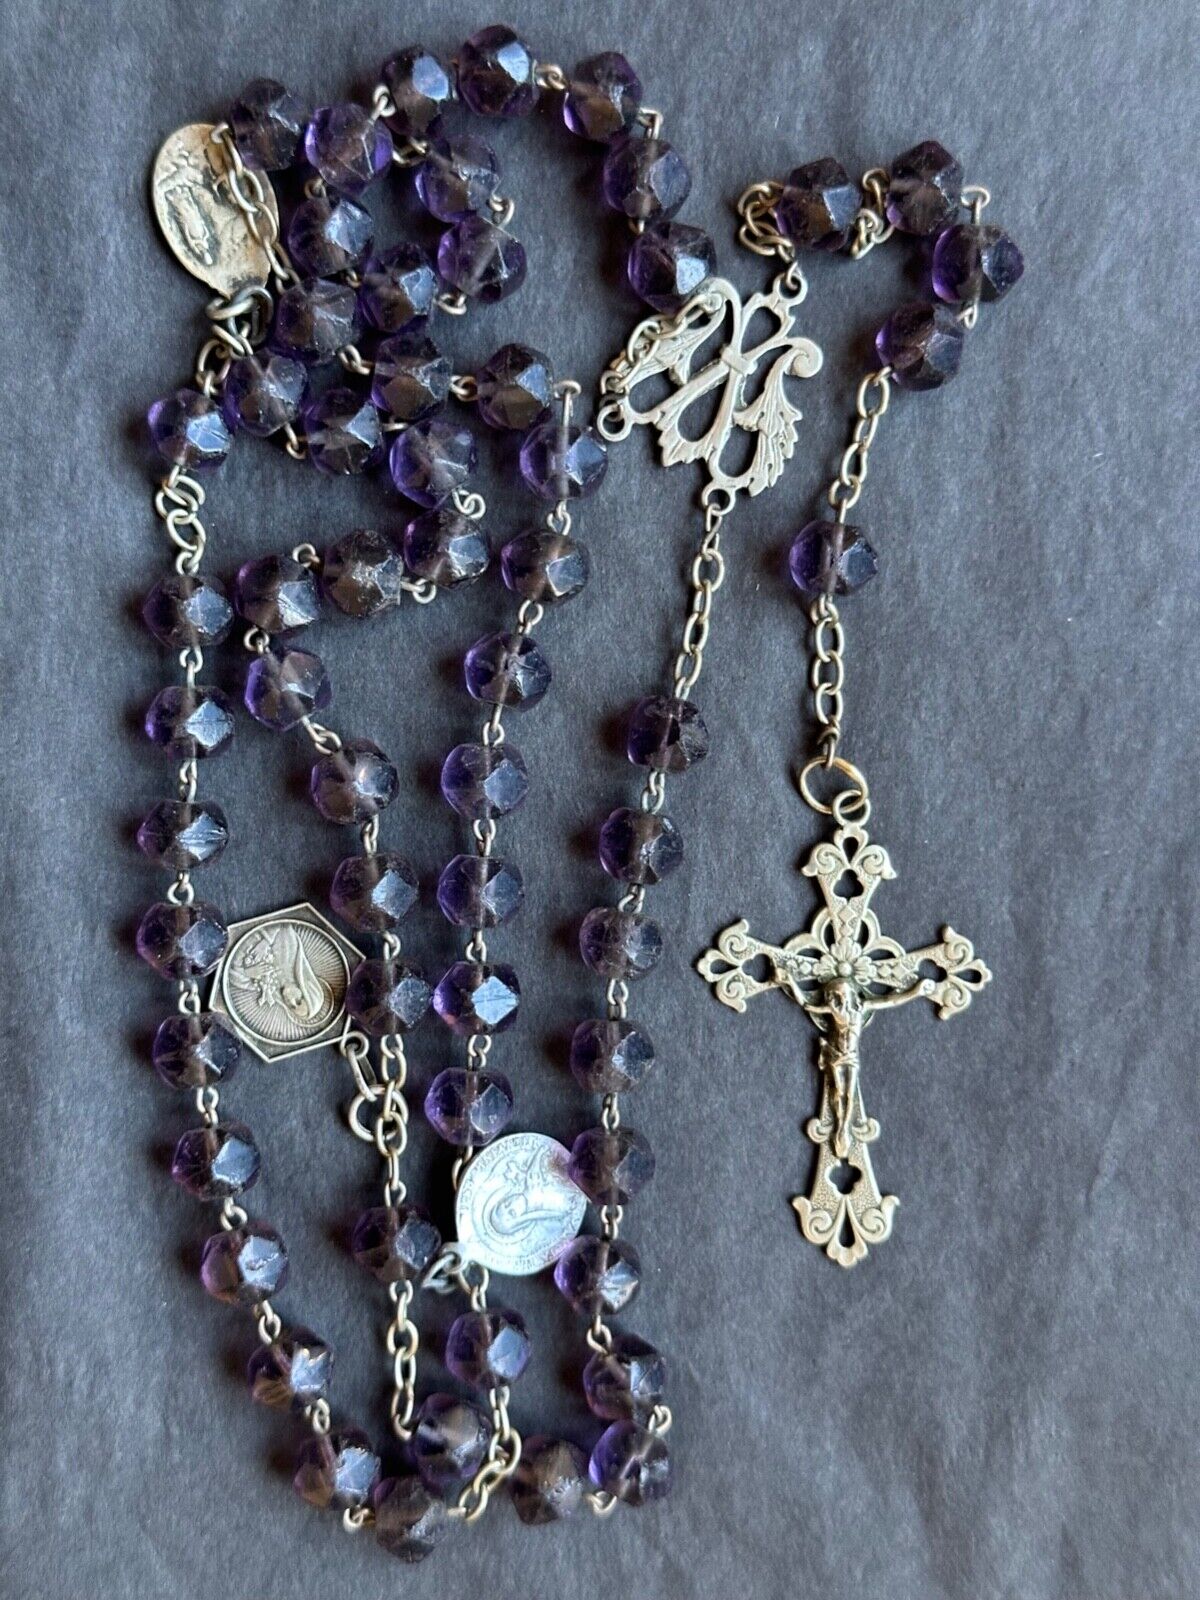 Remarkable French Antique Rosary - Amethyst stones, Sterling Silver Cross,medals